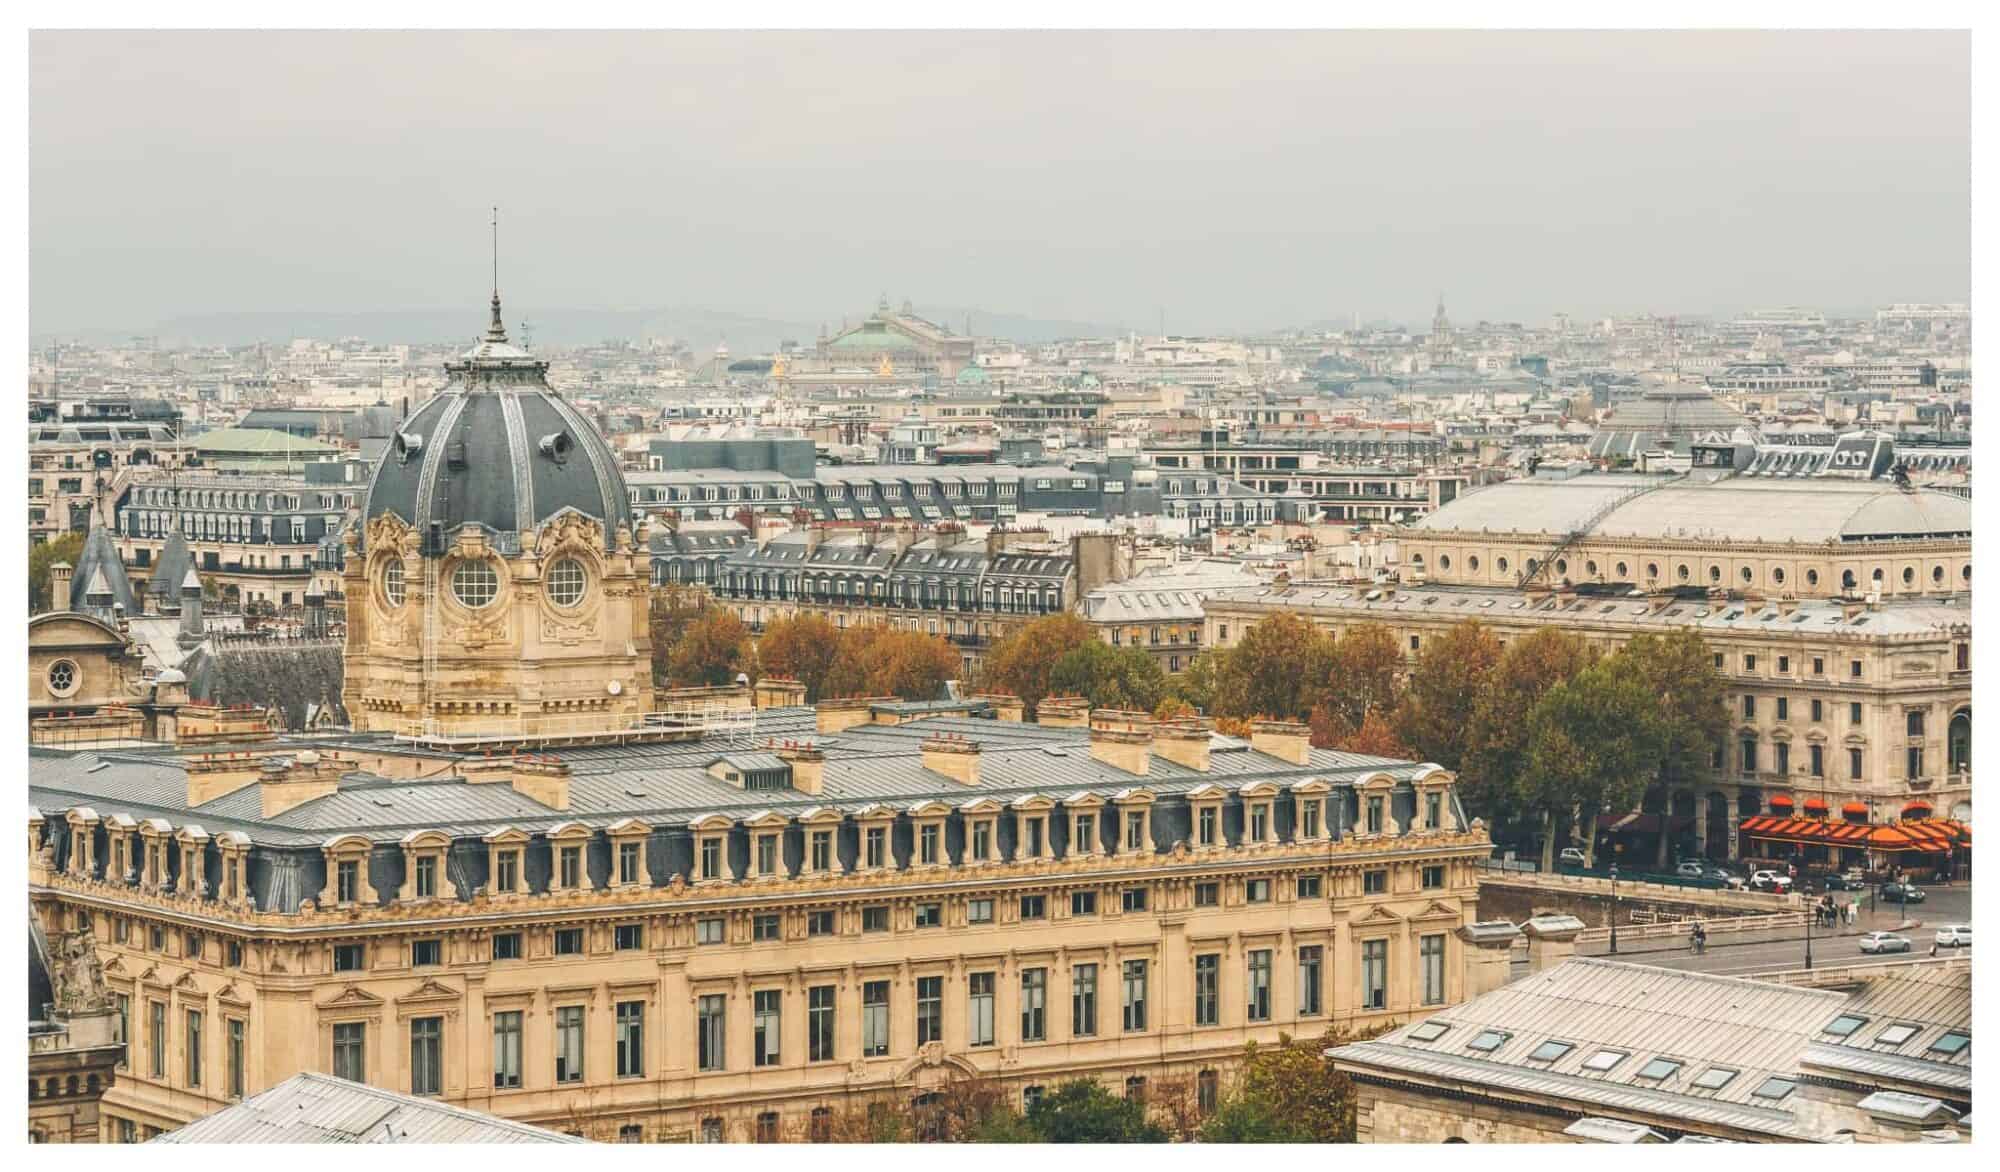 Paris in October: Fashion, Foliage, Exhibitions and Events